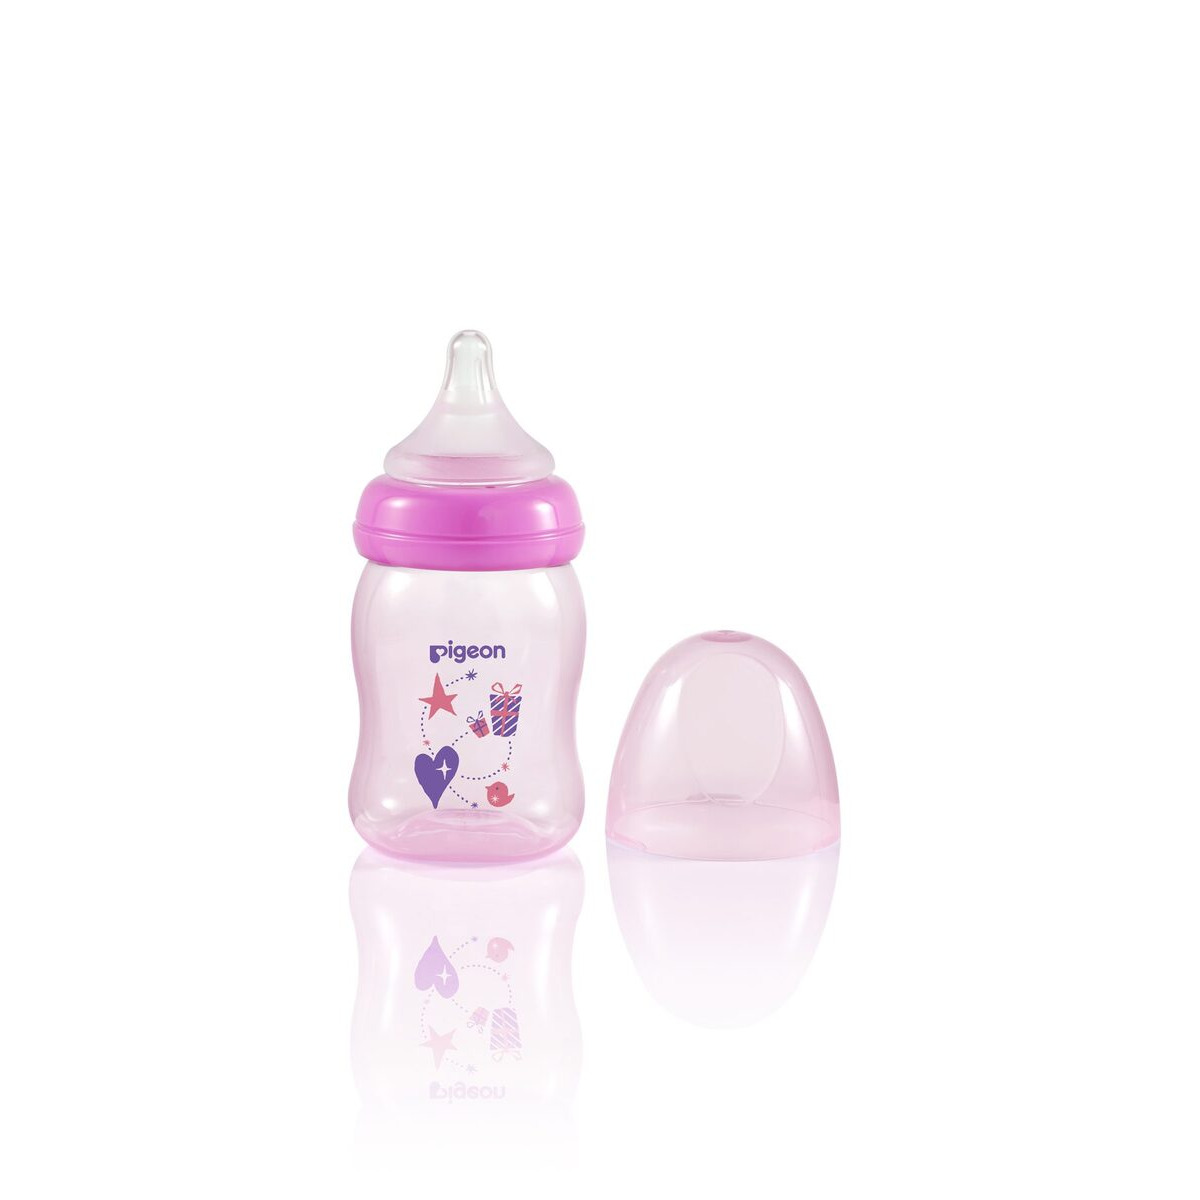 Pigeon Pink SofTouch Peristaltic Plus PP Bottle